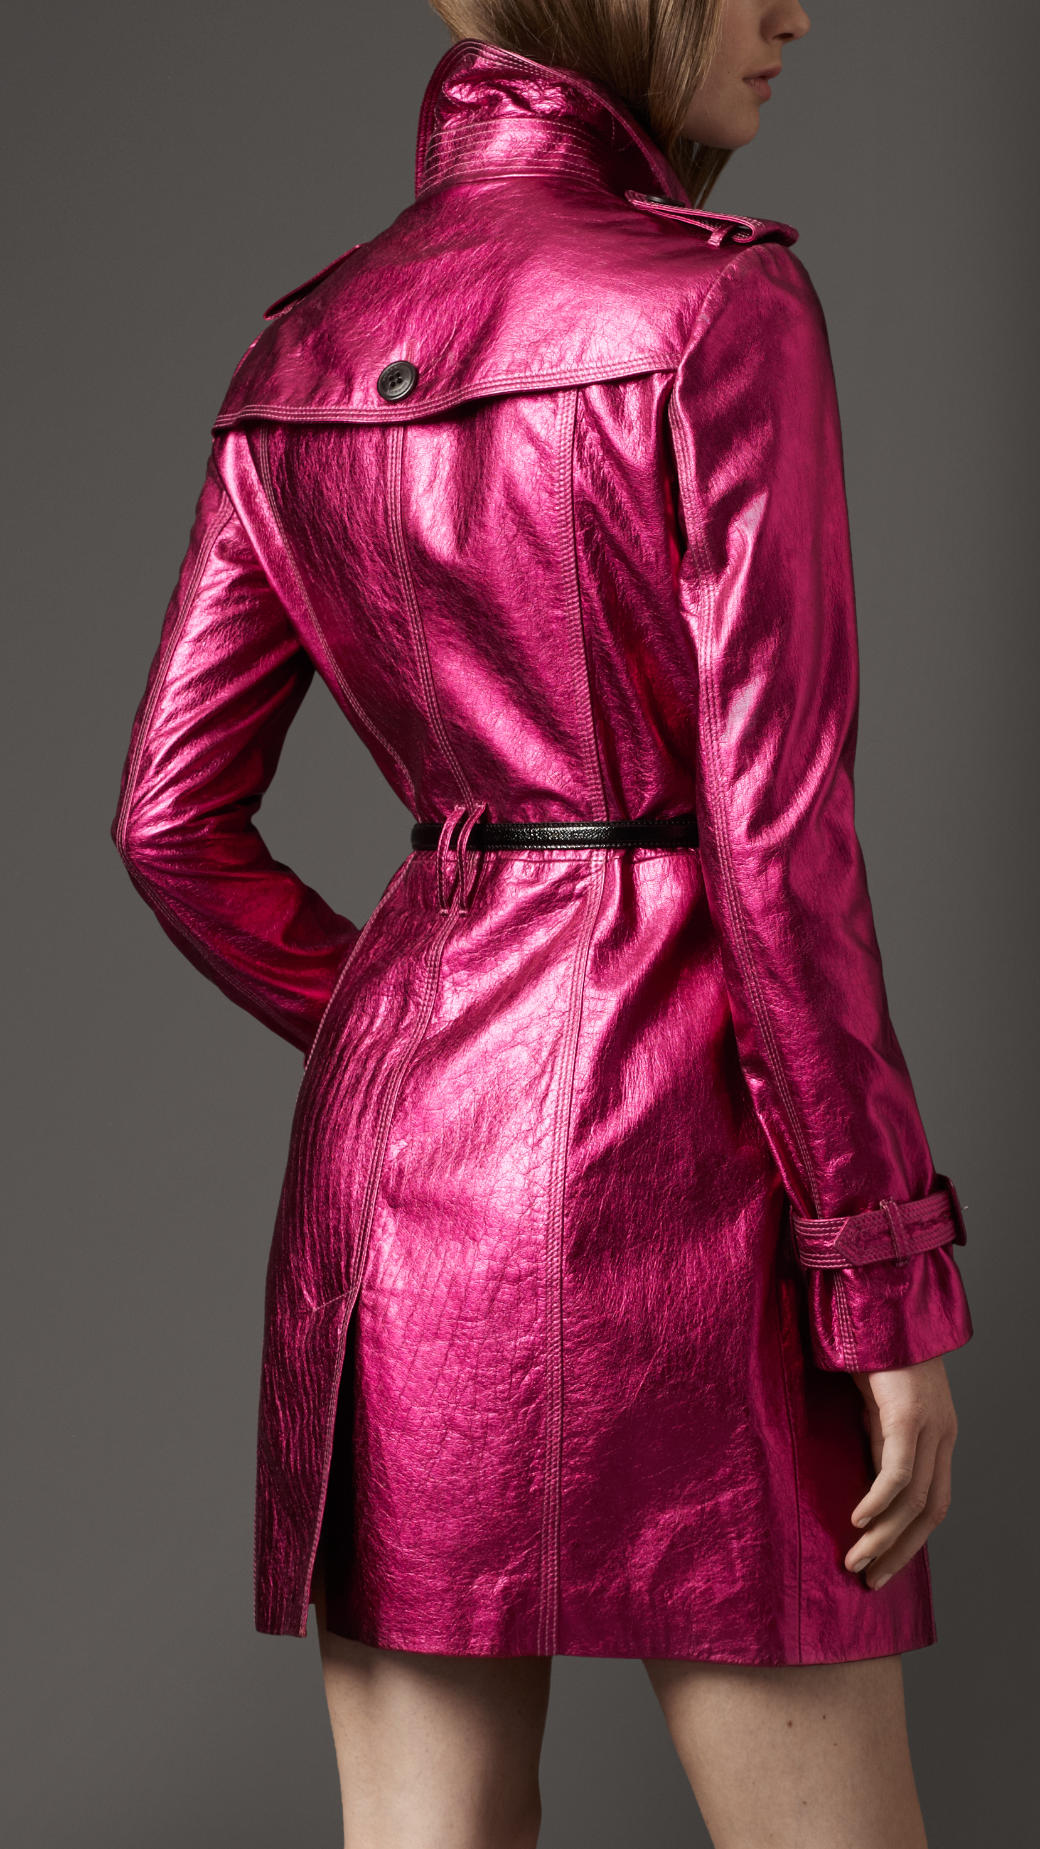 Burberry Midlength Metallic Leather Trench Coat in Fuschia (Pink) - Lyst